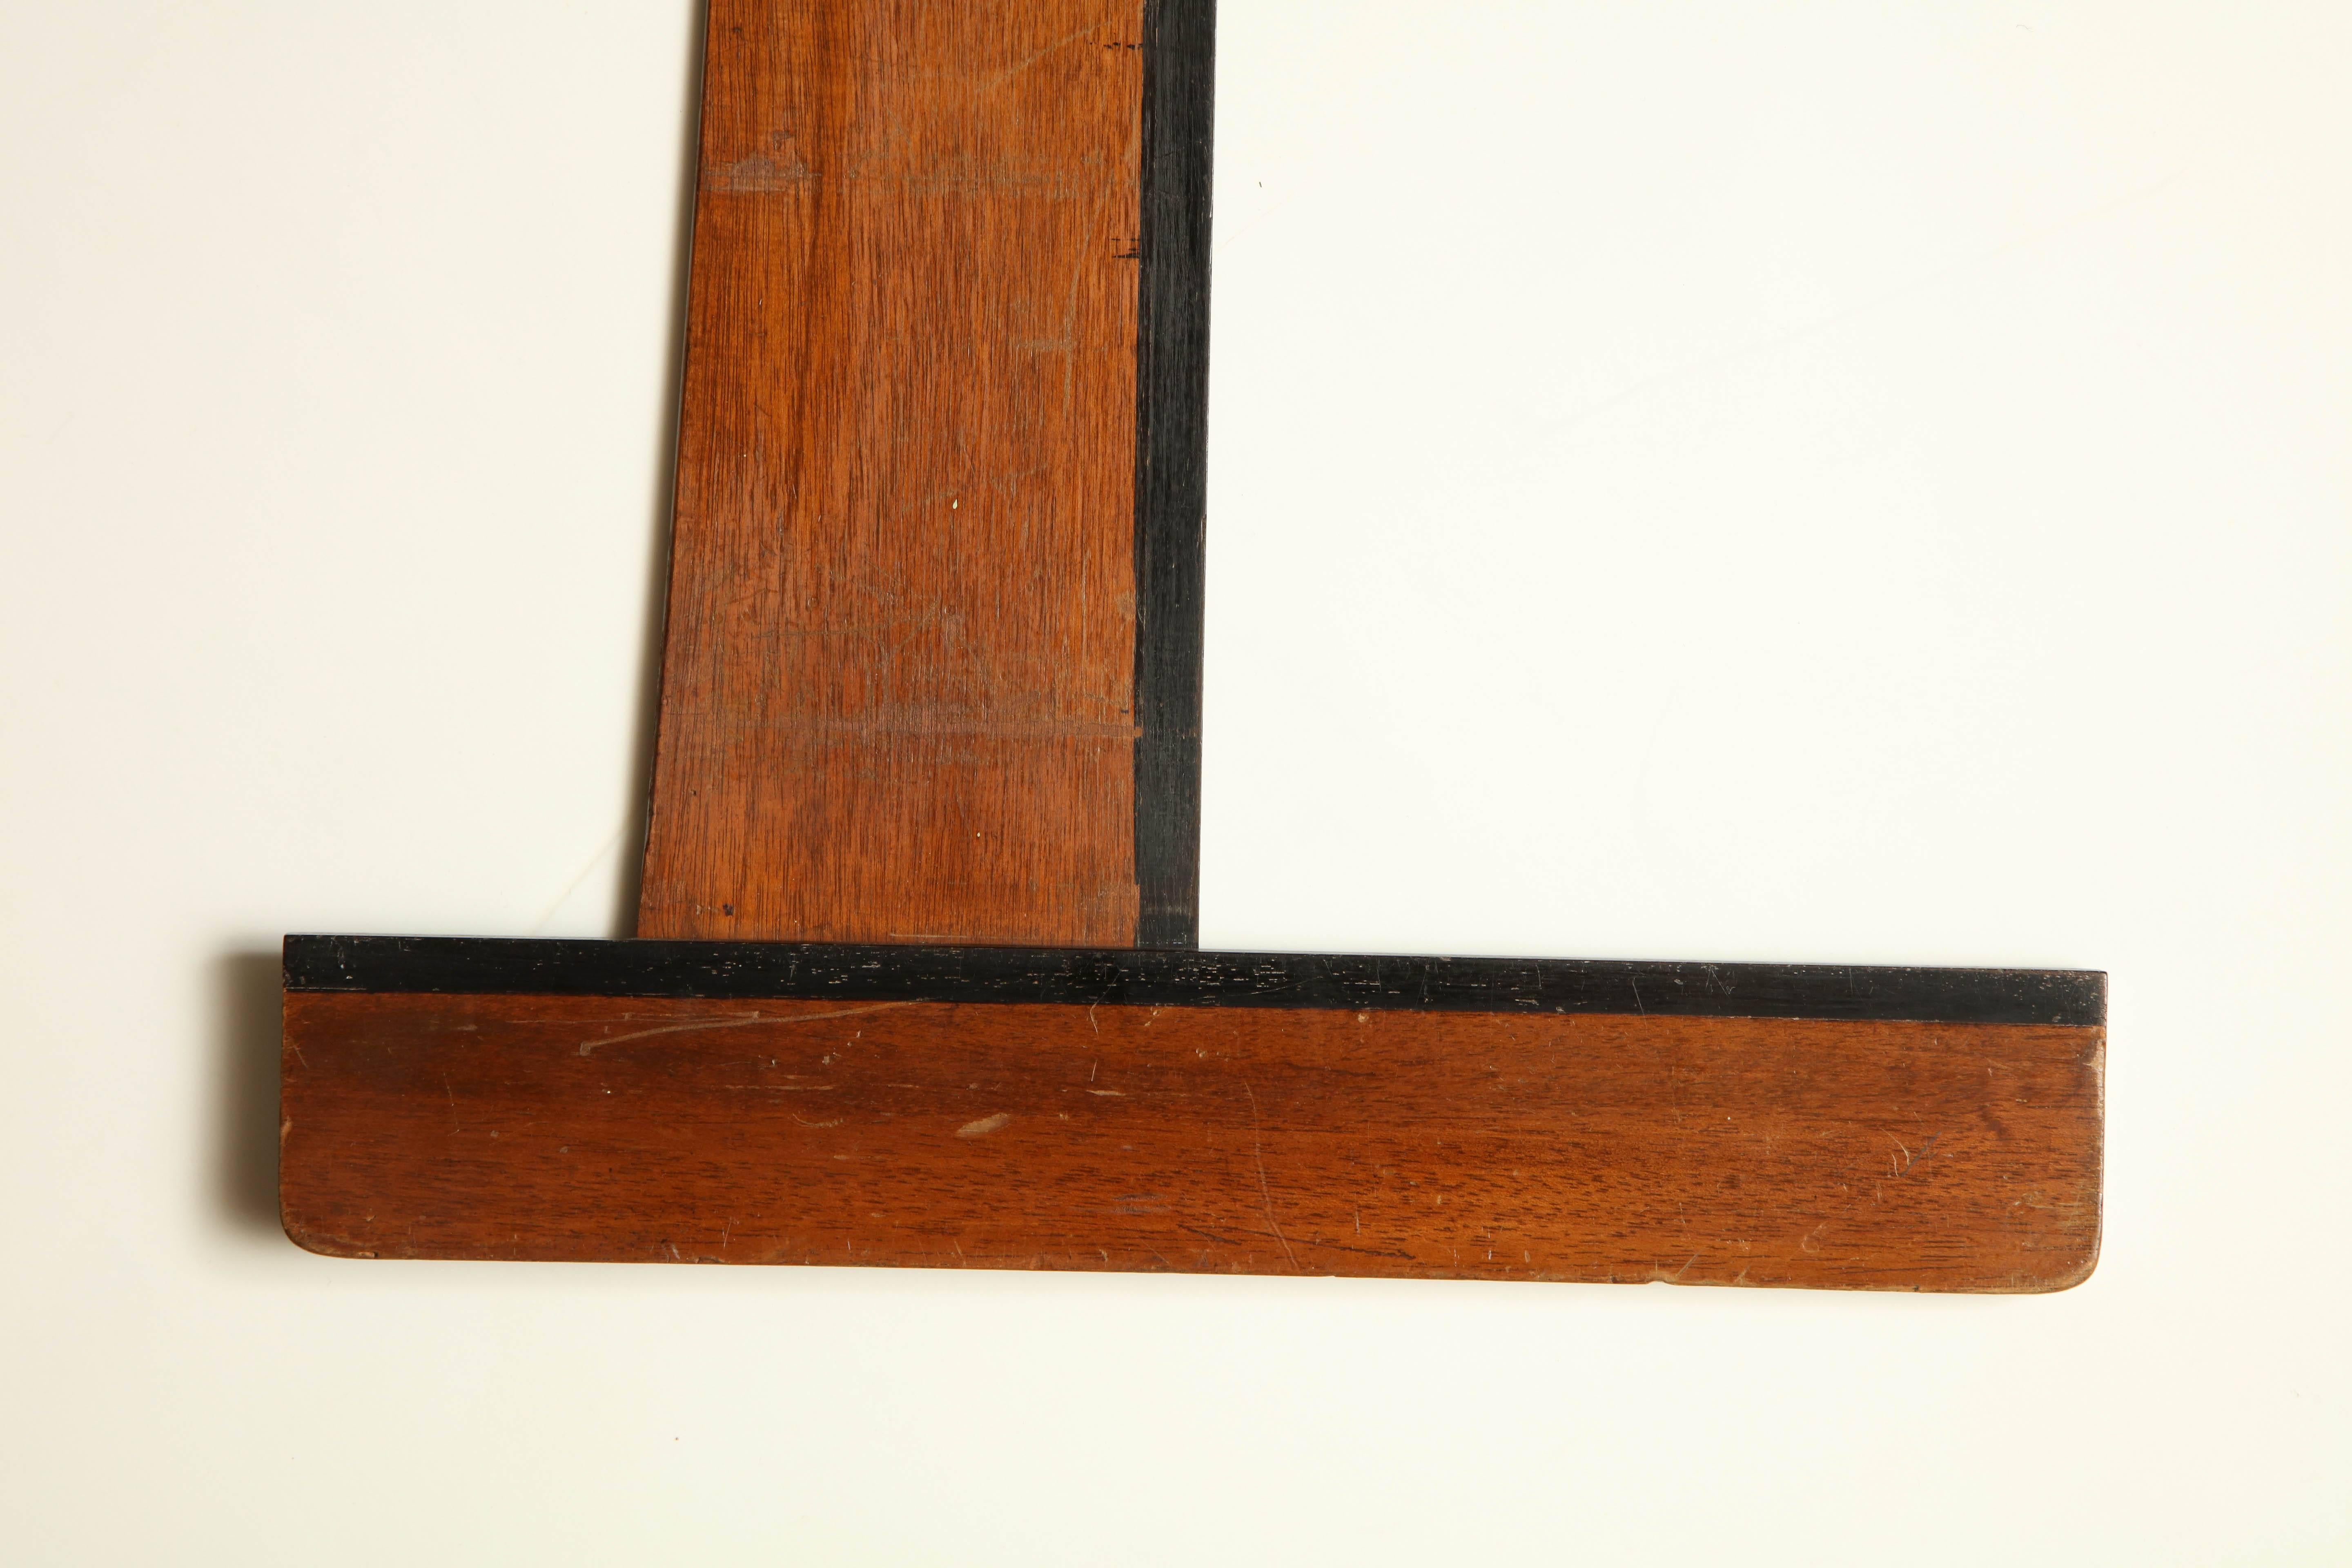 19th century English T-square, drawing square or a drawing T in fruitwood and ebony.